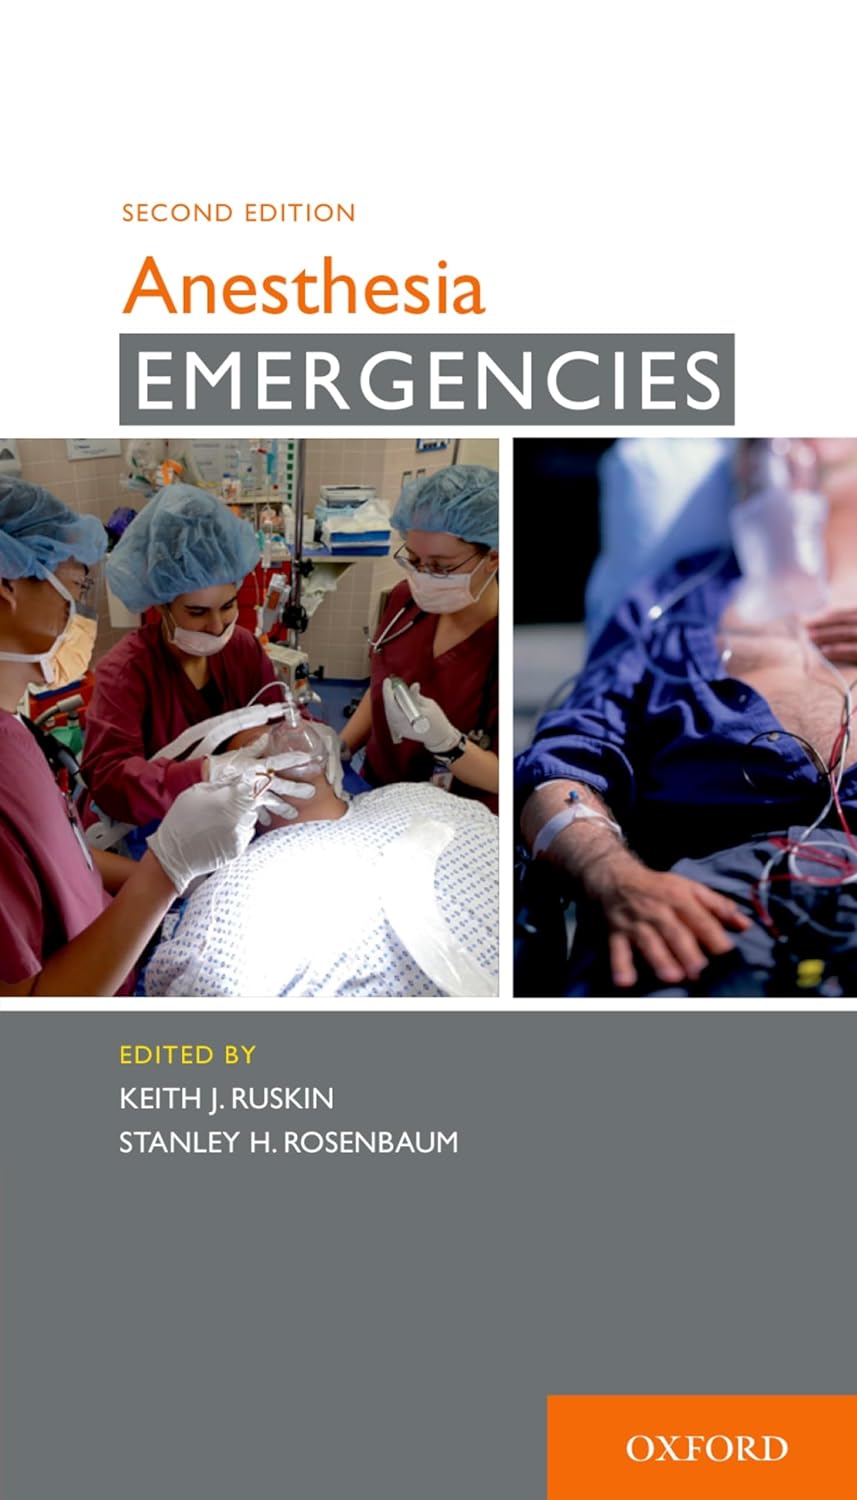 Anesthesia Emergencies 2nd Edition